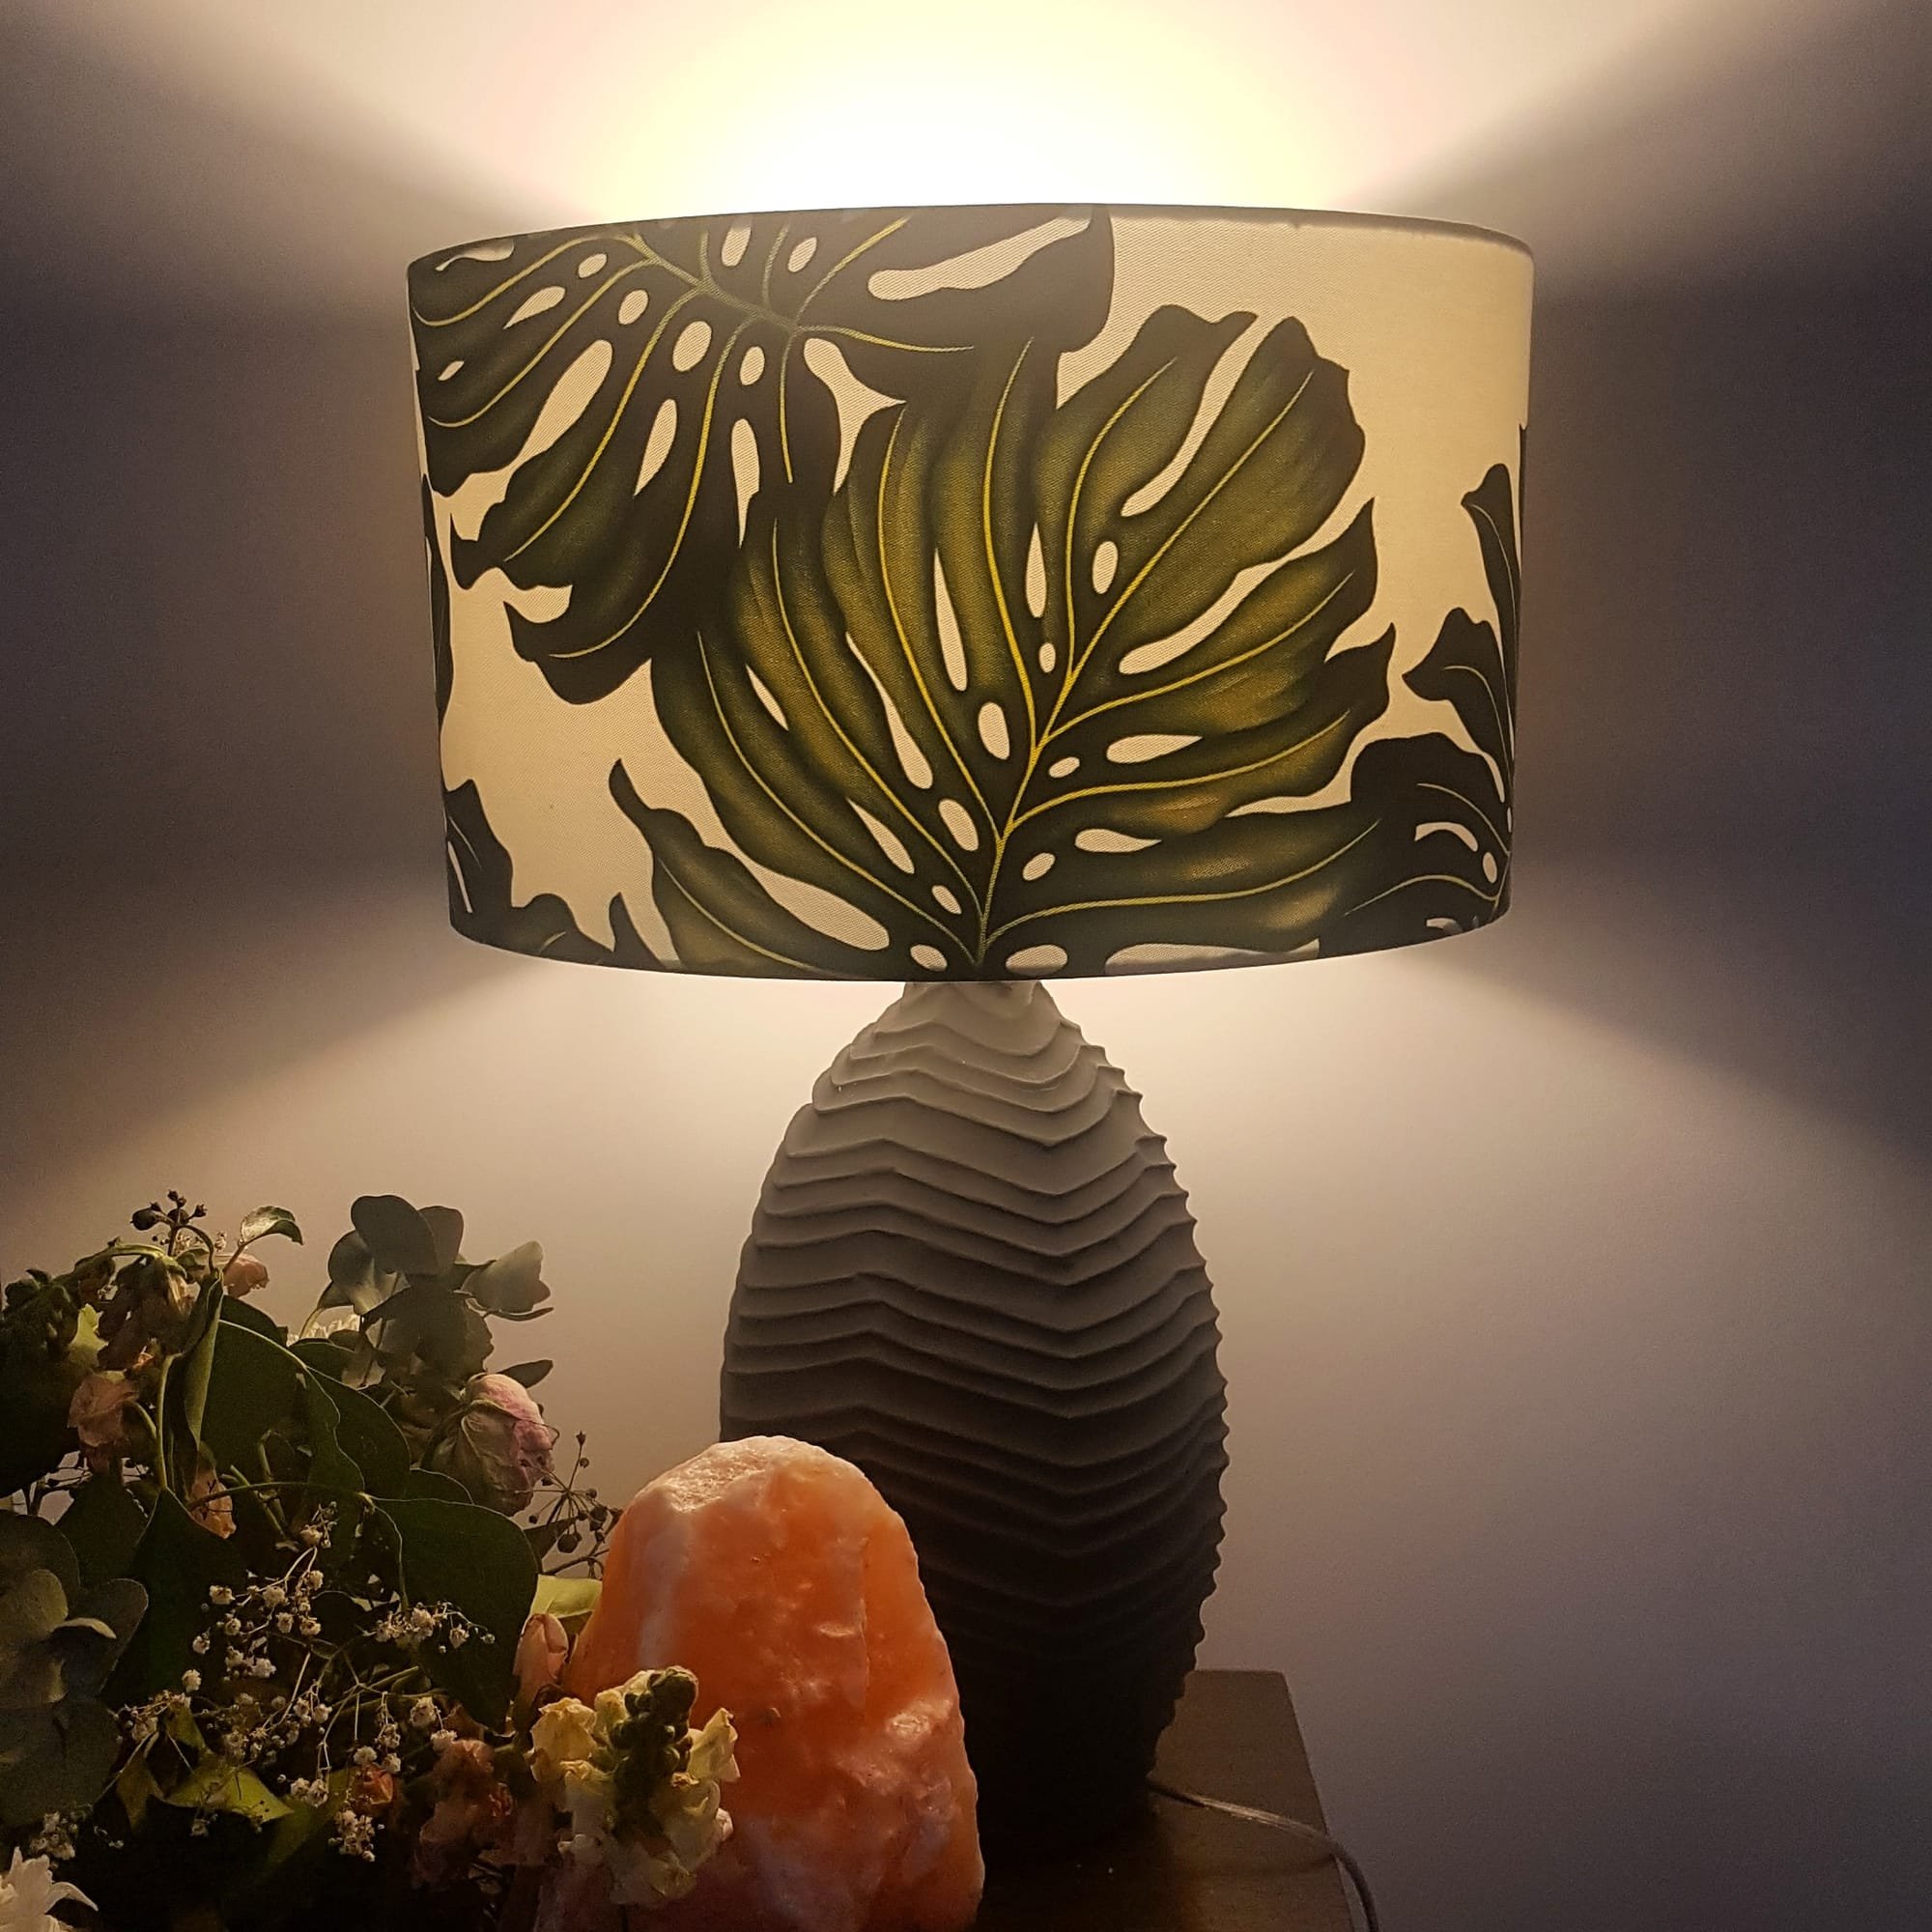 Custom Made Lampshades Australia, Lamp Shades Made To Order Melbourne